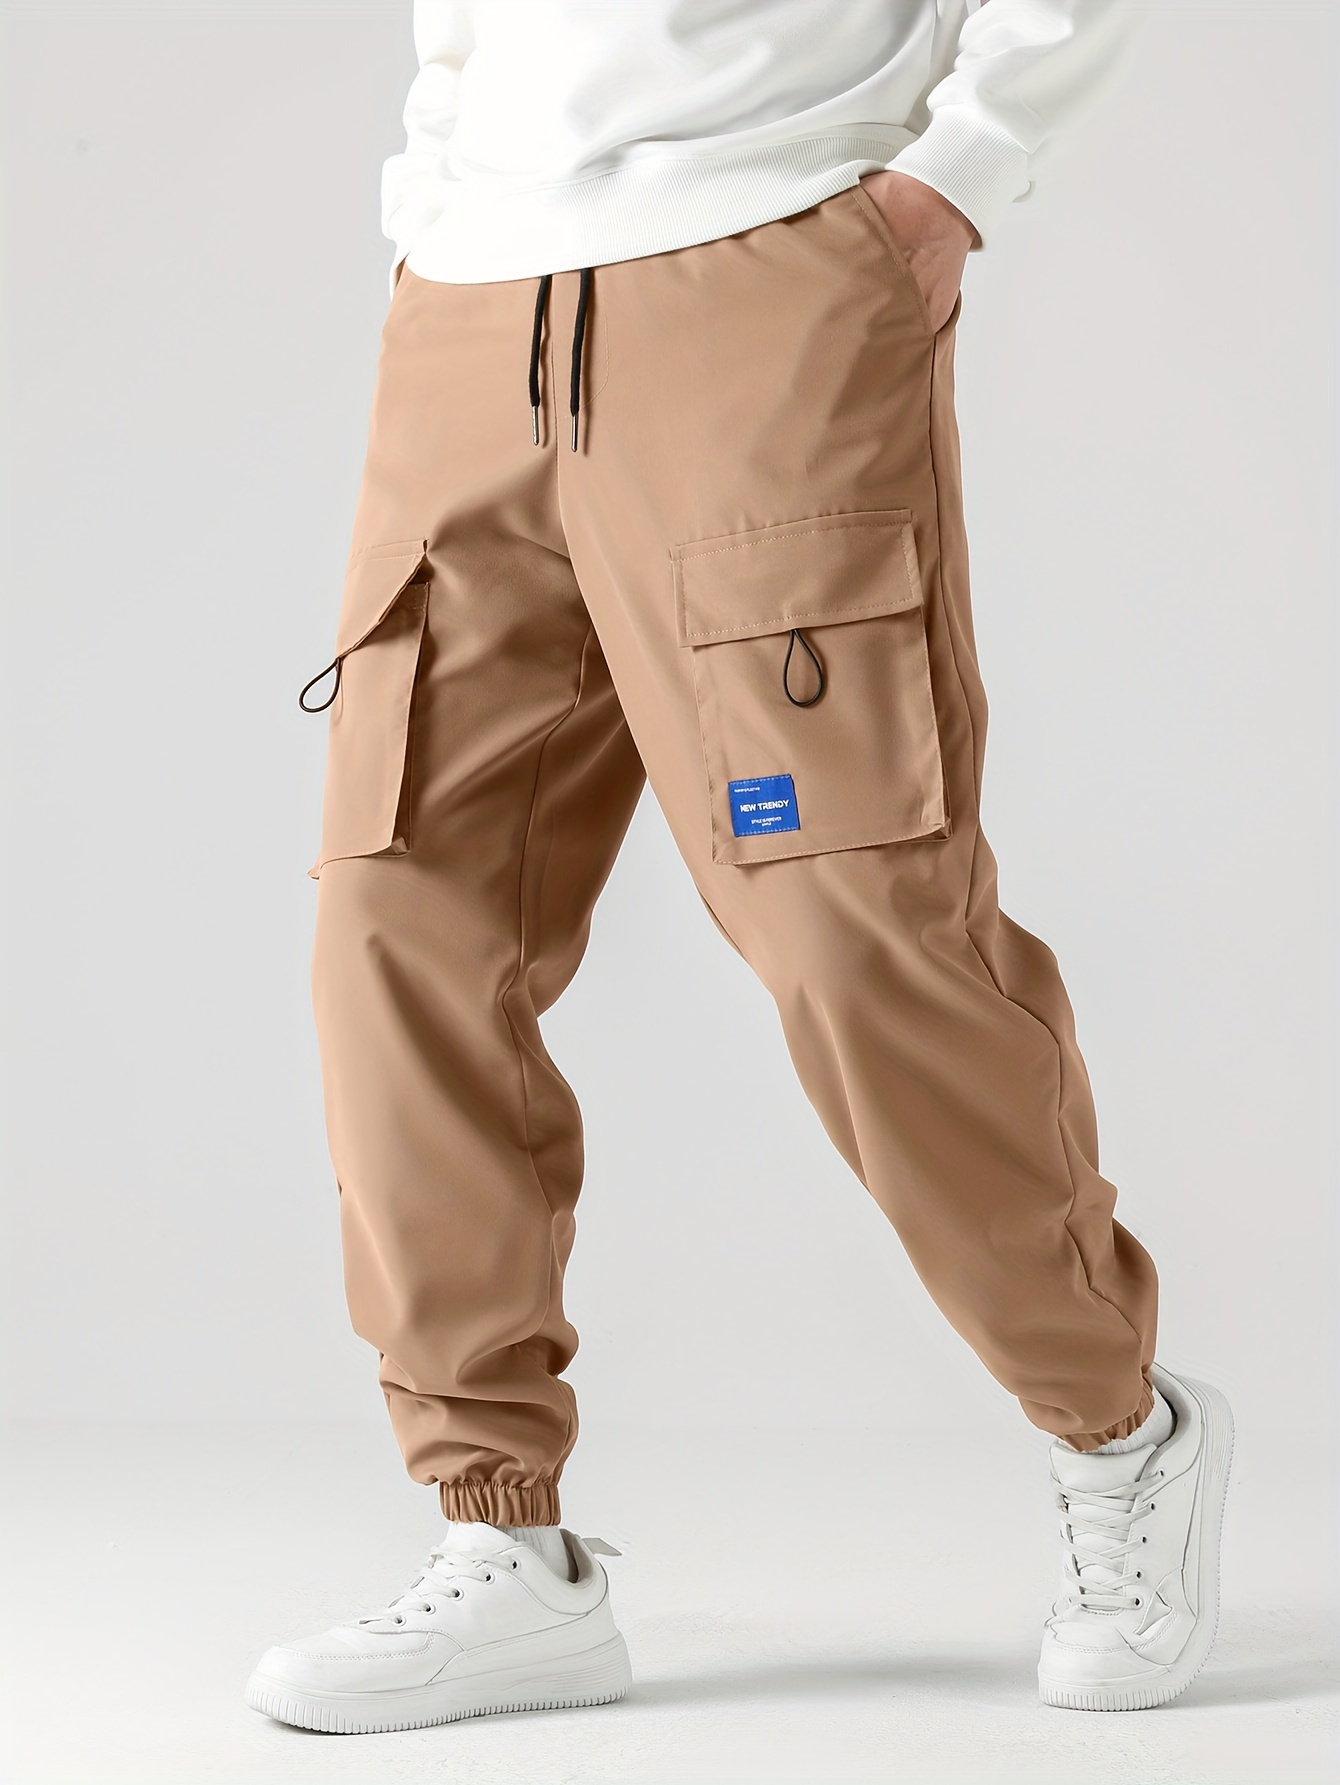 NEW VISION'' Tag Men's Cargo Pants With Flap Pockets, Loose Trendy  Overalls